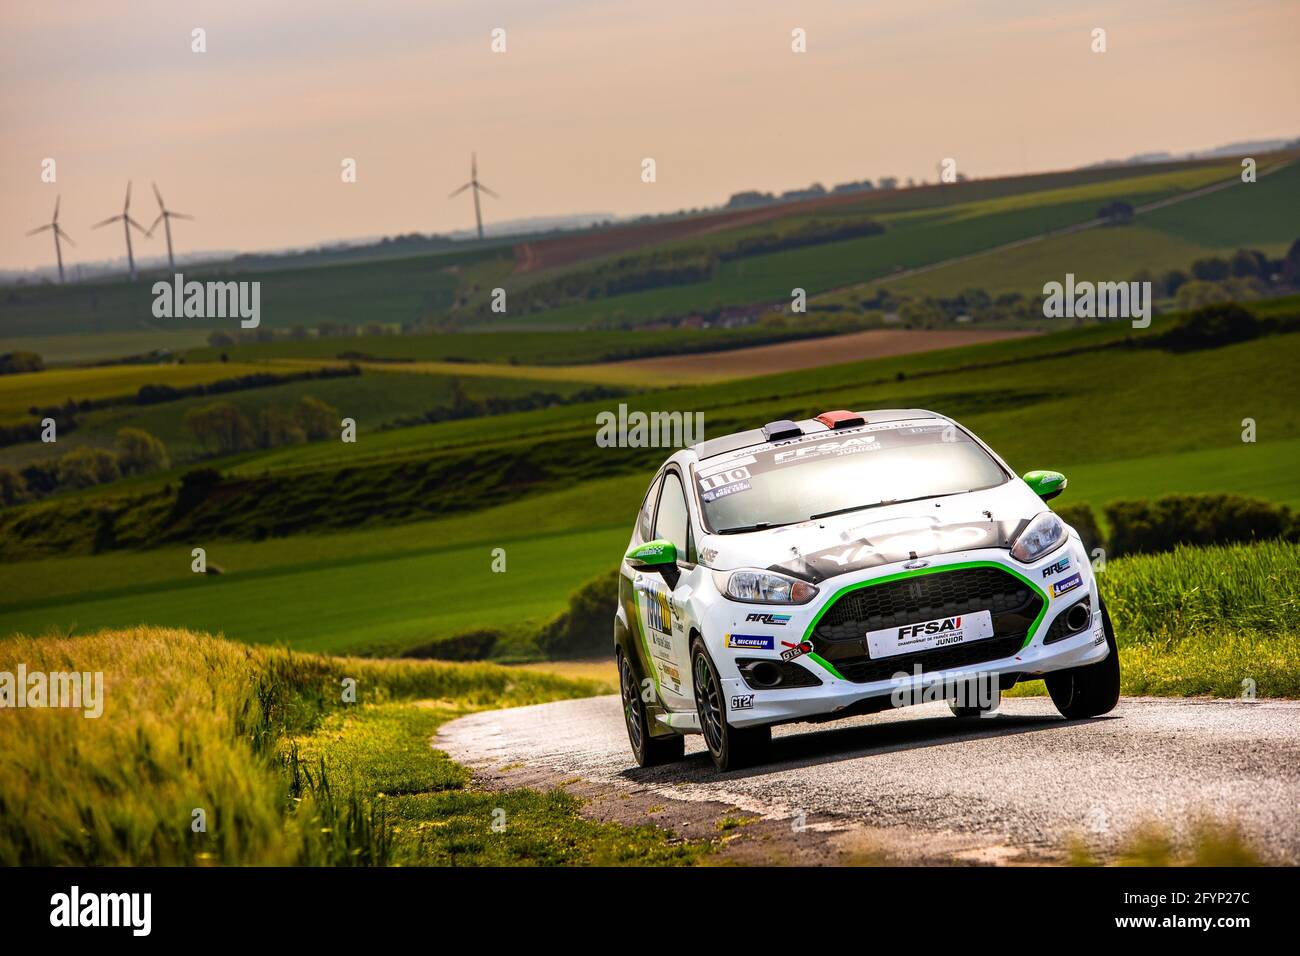 110 Bonnet Guillaume, Blanc Nicolas, Ford Fiesta, action during the Rallye  du Touquet 2021, 1st round of the Championnat de France des Rallyes 2021,  from May 27 to 29 in Le Touquet,